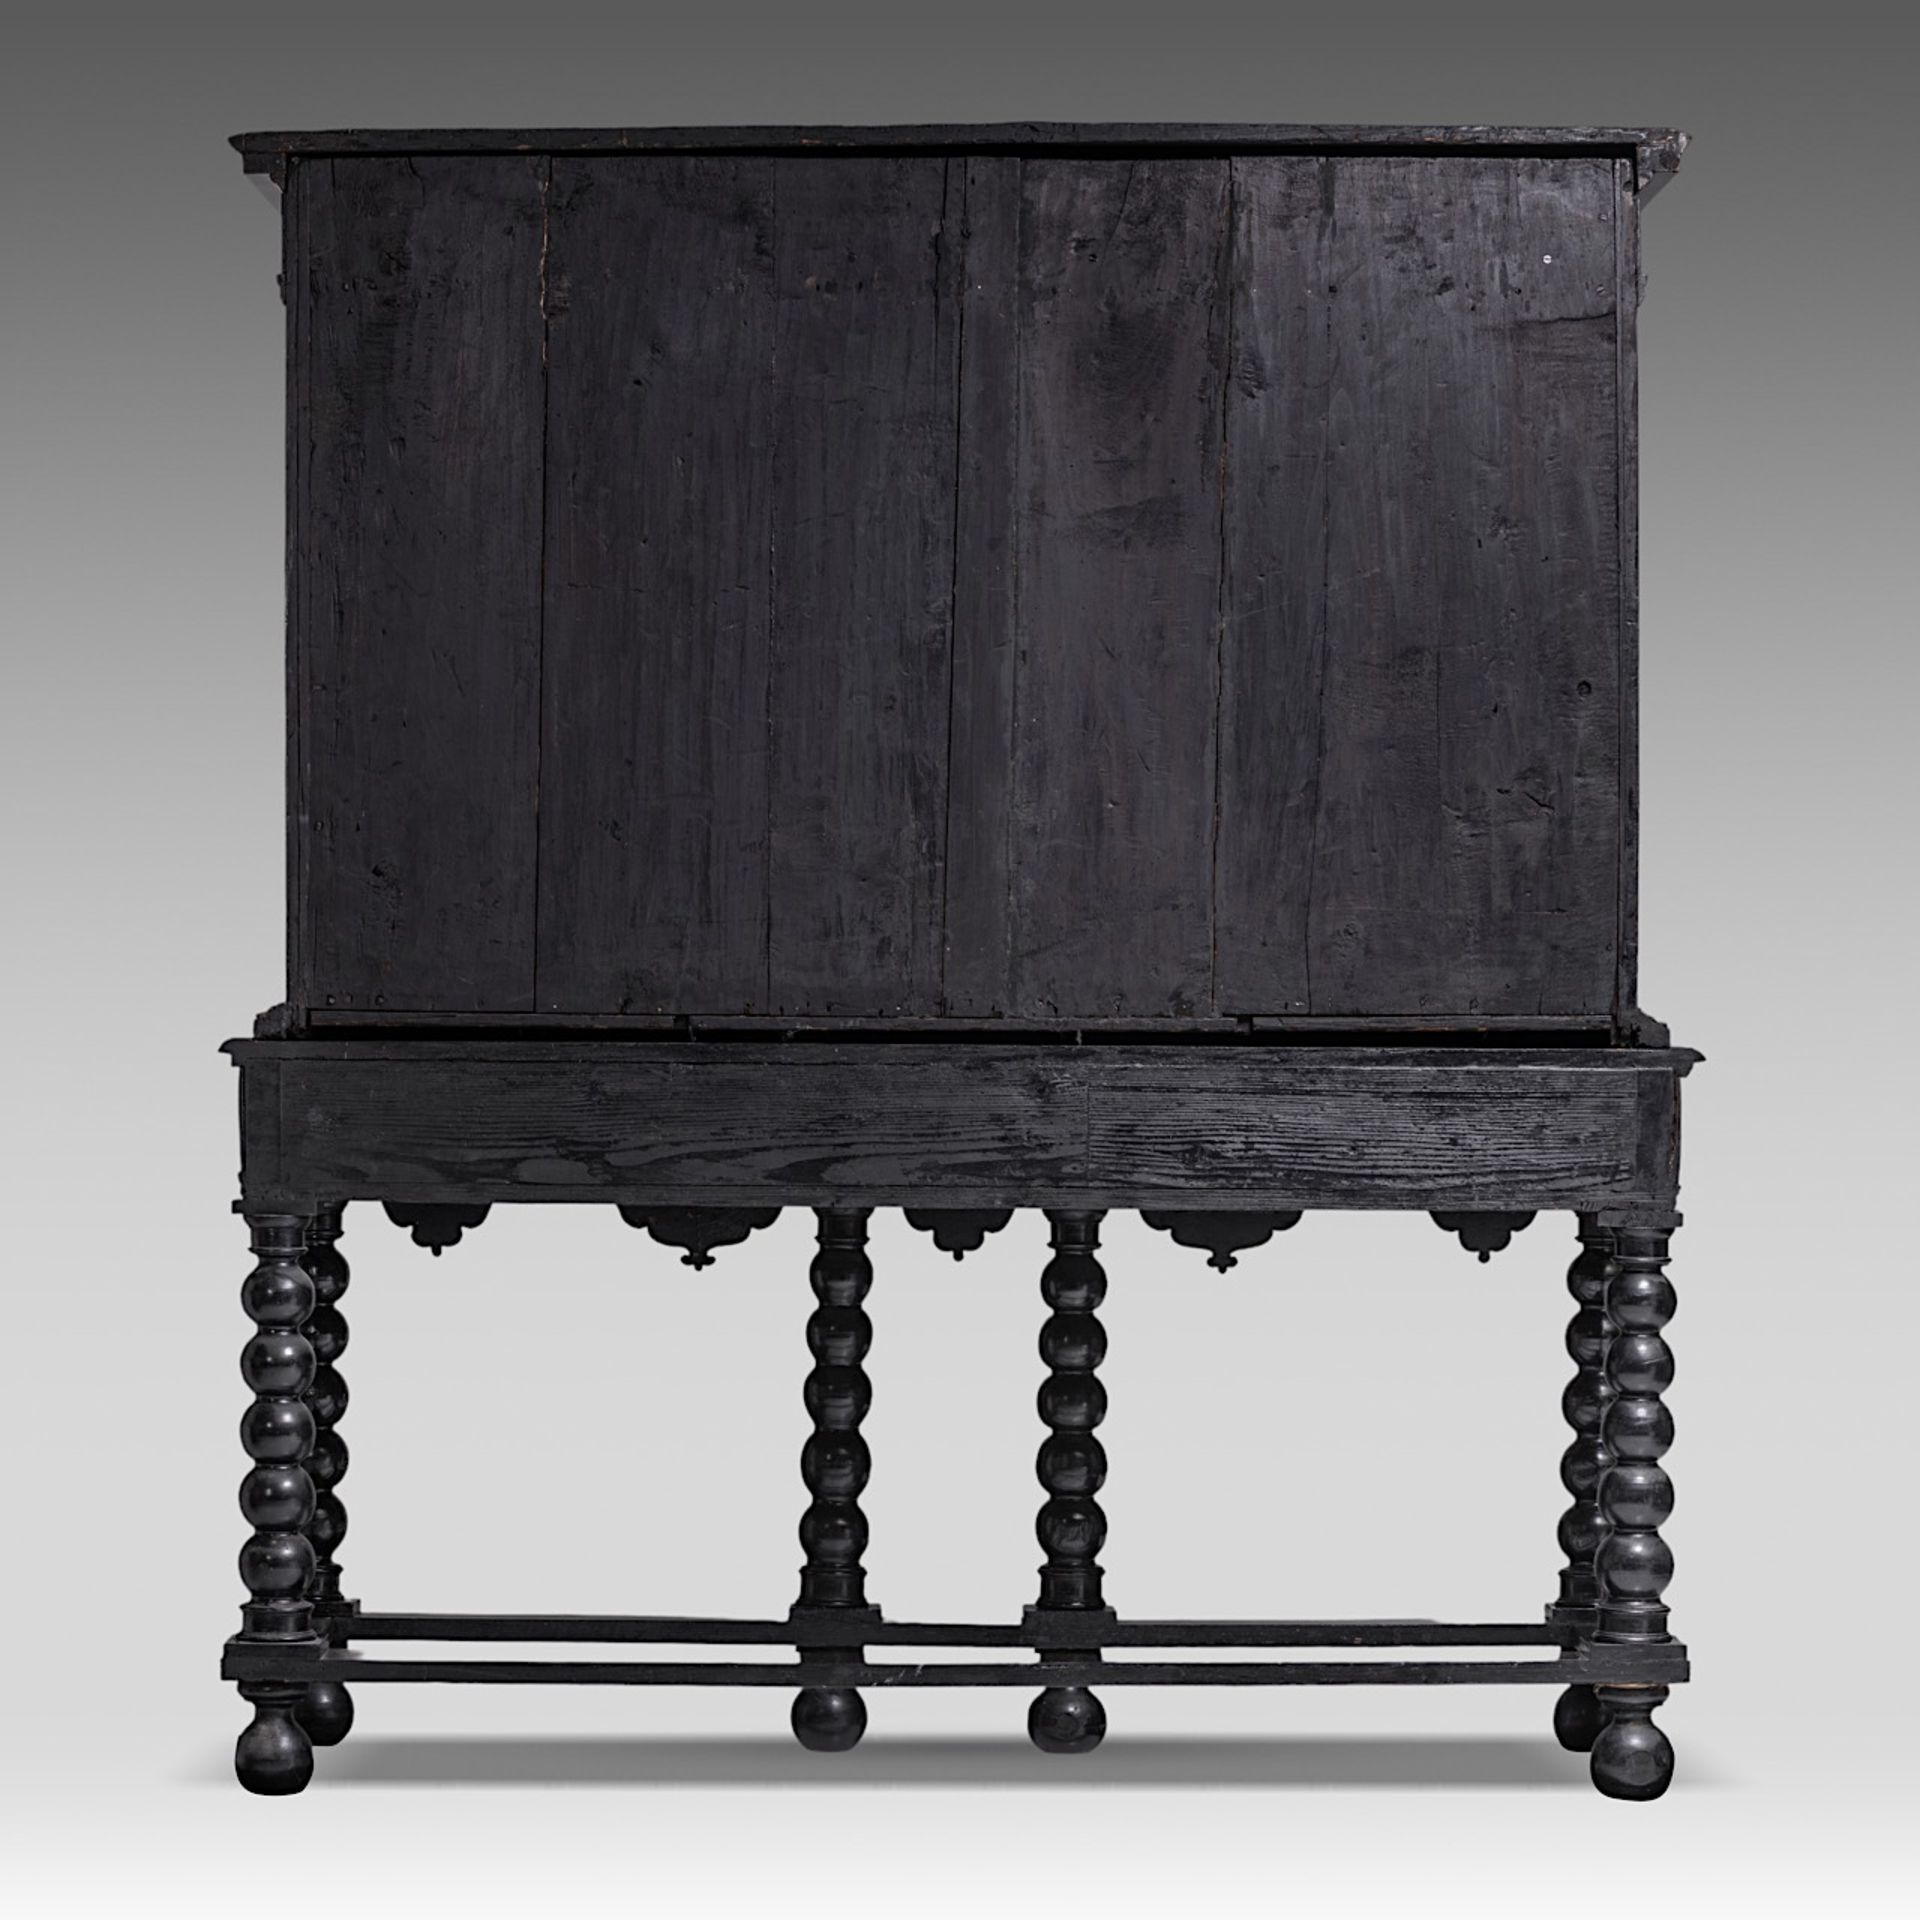 PREMIUM LOT - An exceptional 17thC French ebony and ebonised cabinet-on-stand, H 181,5 - W 163 - D 5 - Bild 6 aus 14